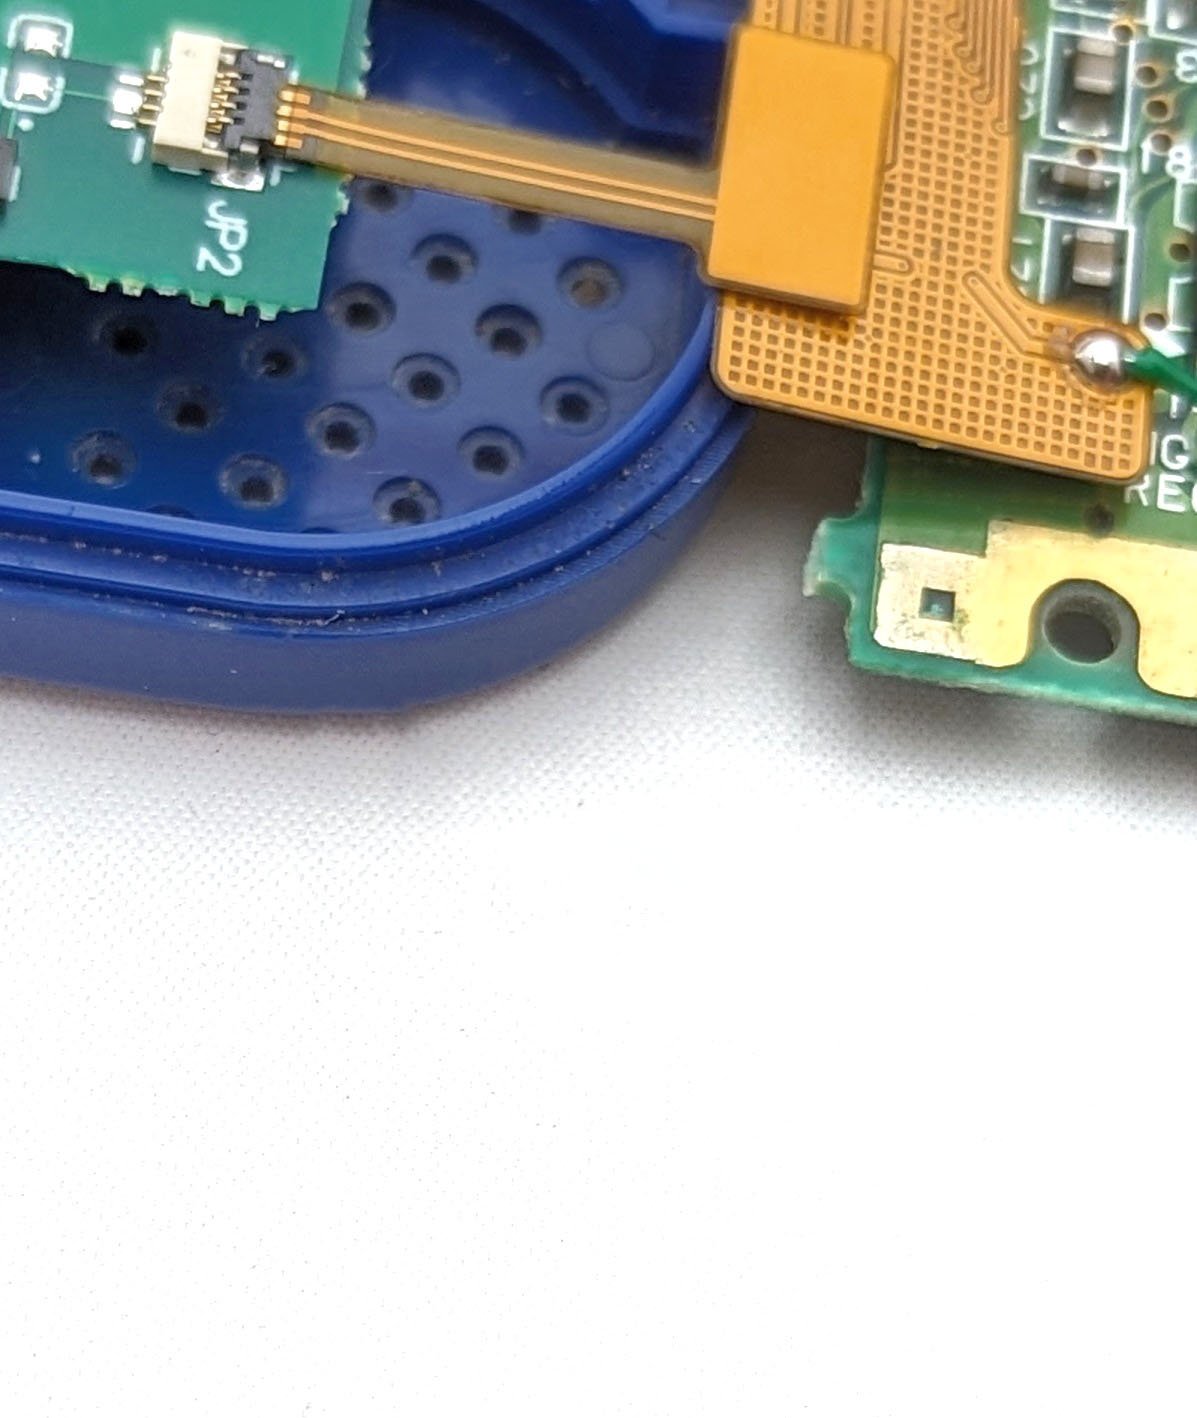 A close up on a ribbon cable plugged into a game boy